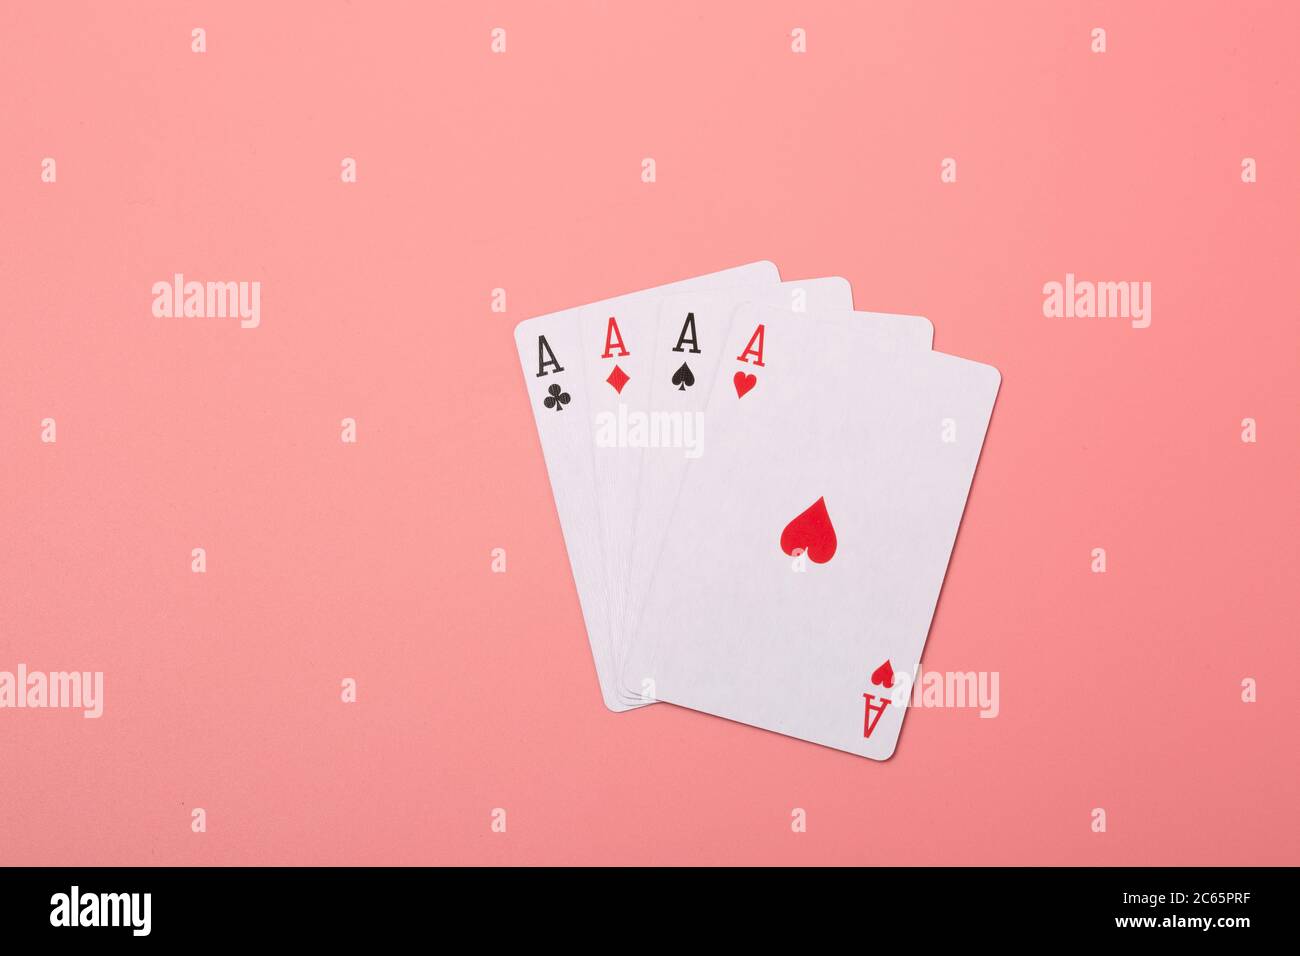 Expanded playing cards on pink background Stock Photo